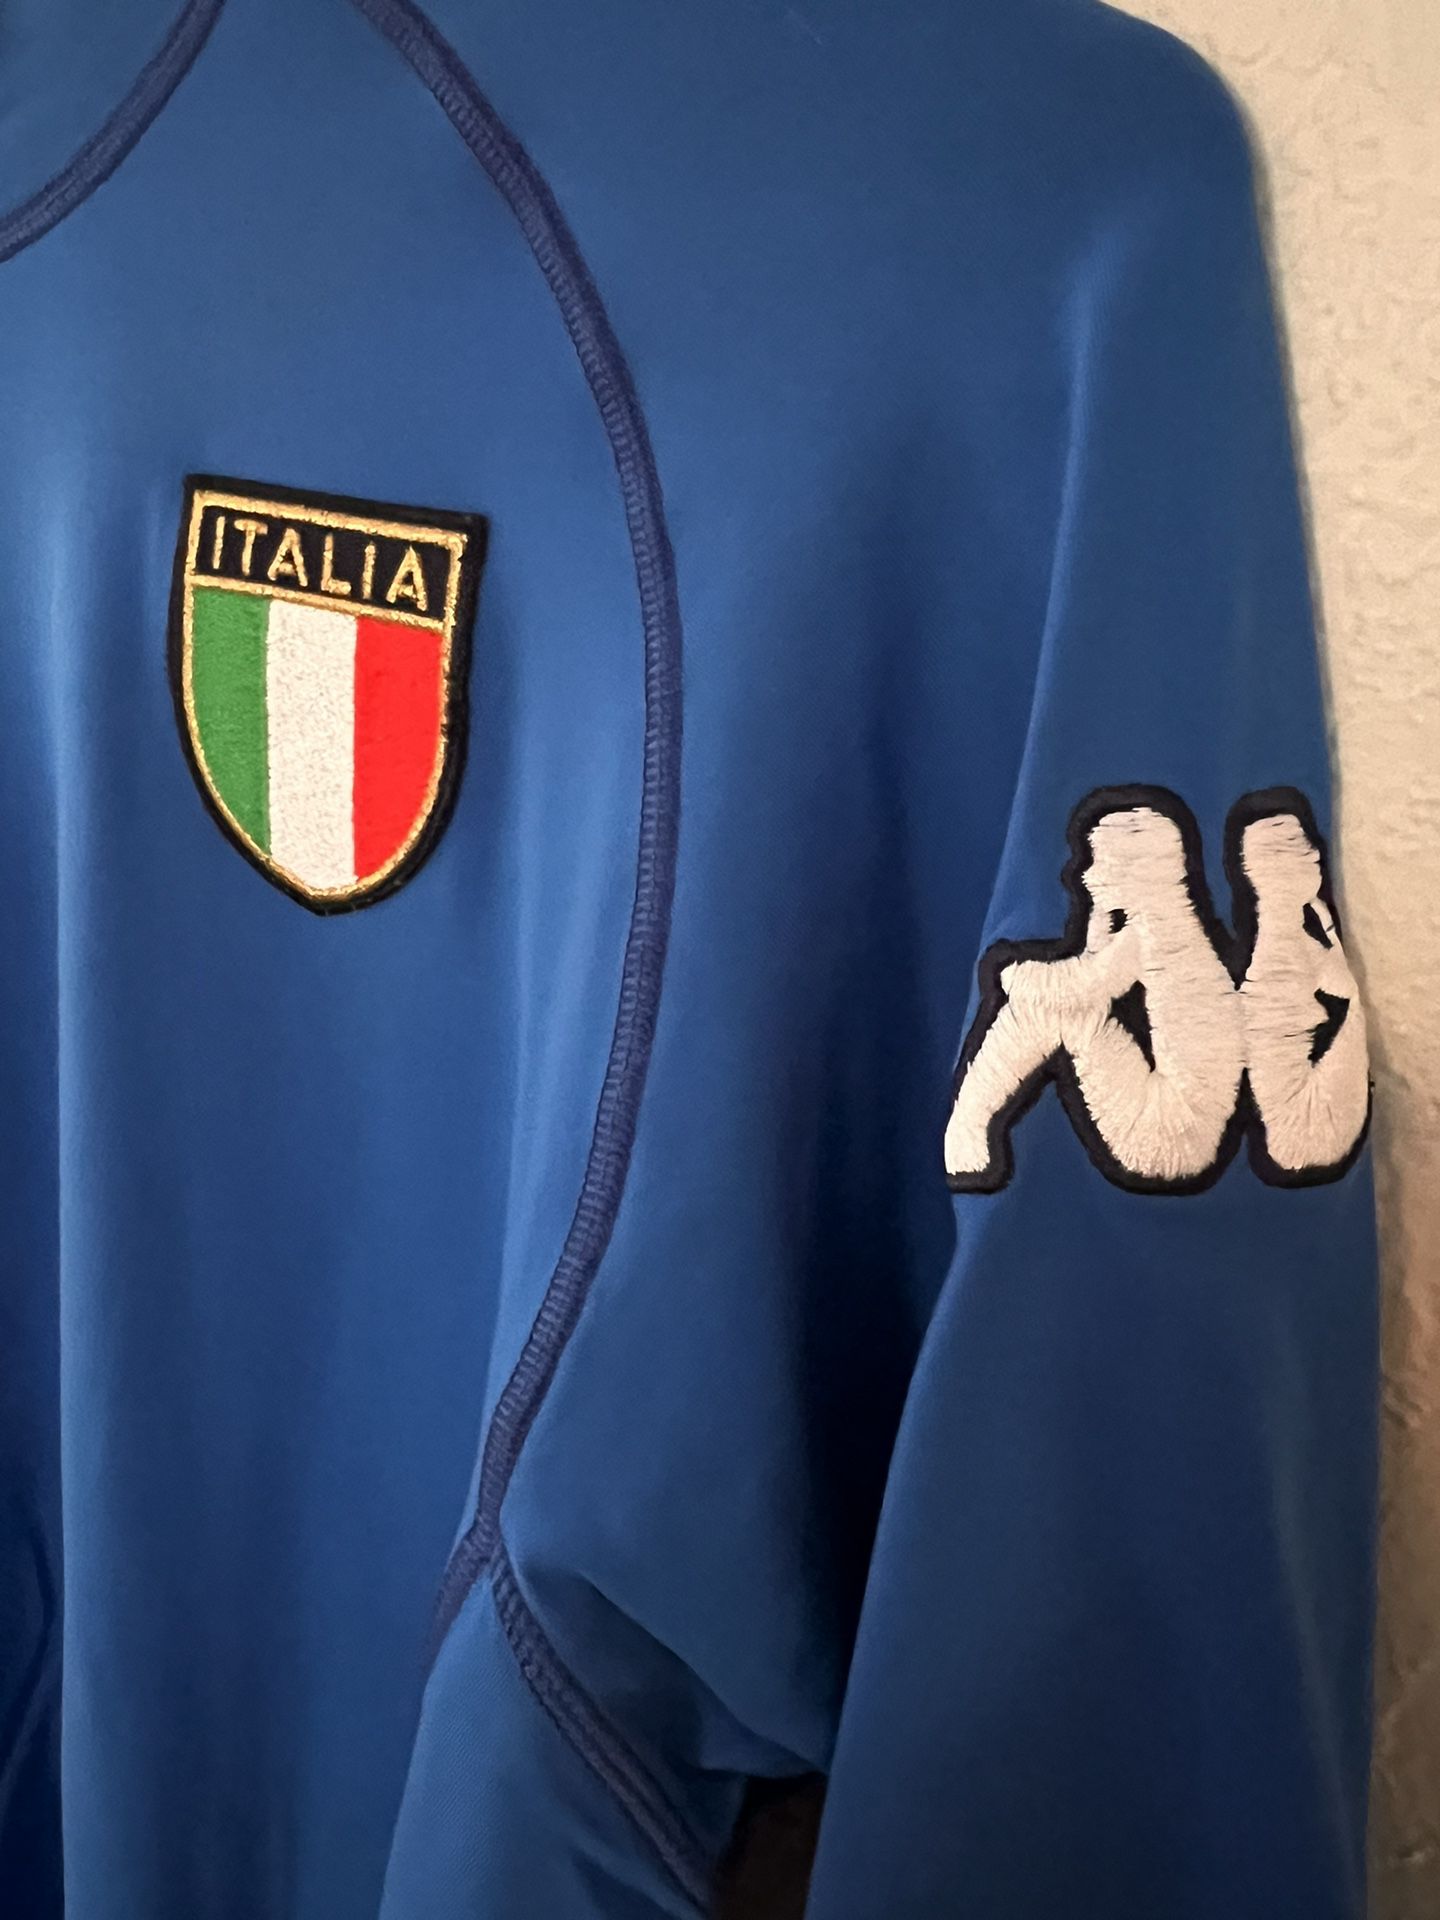 Vibtage 2000/01 Italy Home Football Shirt (XL) Purchased Traveling Abroad